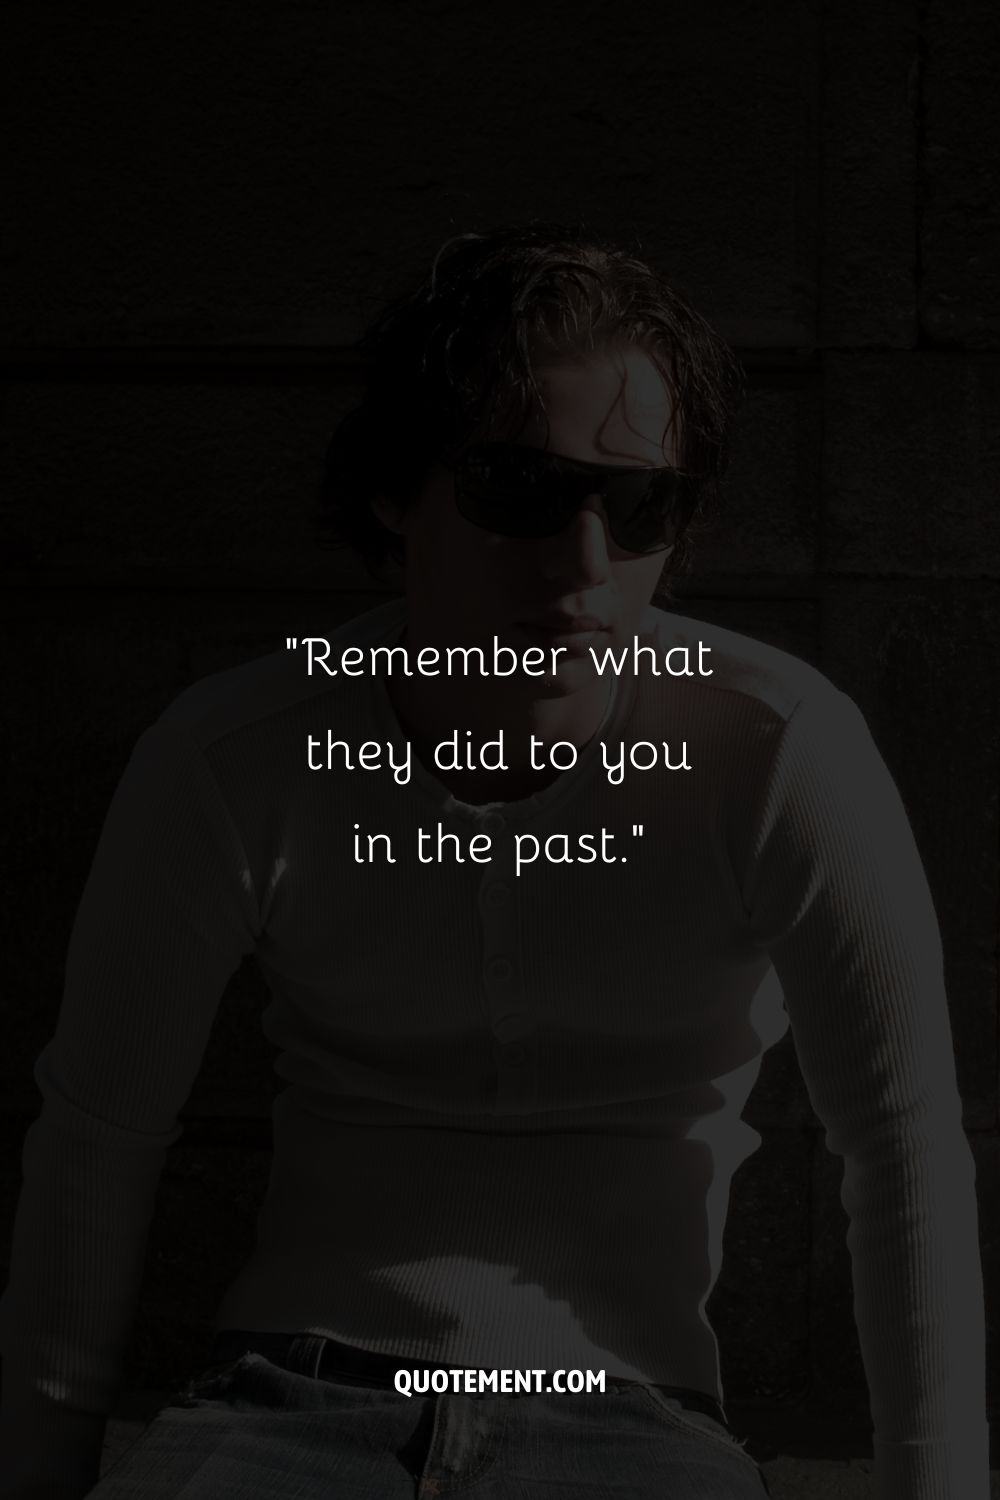 “Remember what they did to you in the past.”